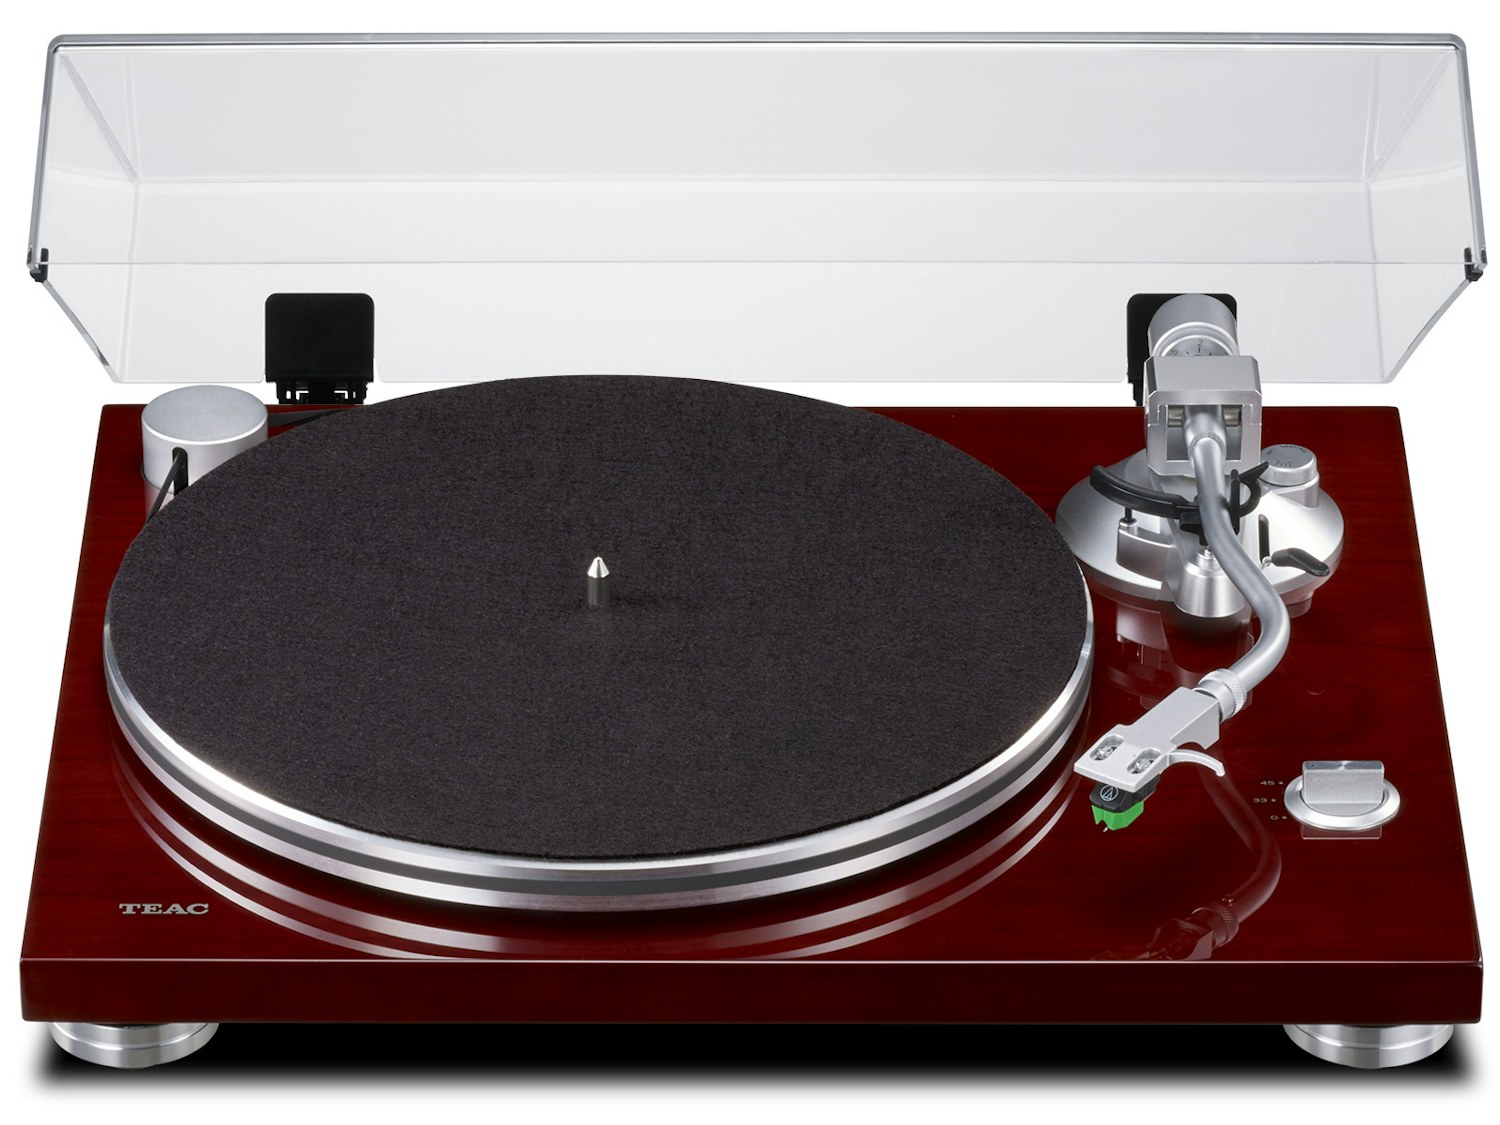 Tn 3b turntable cherry front view